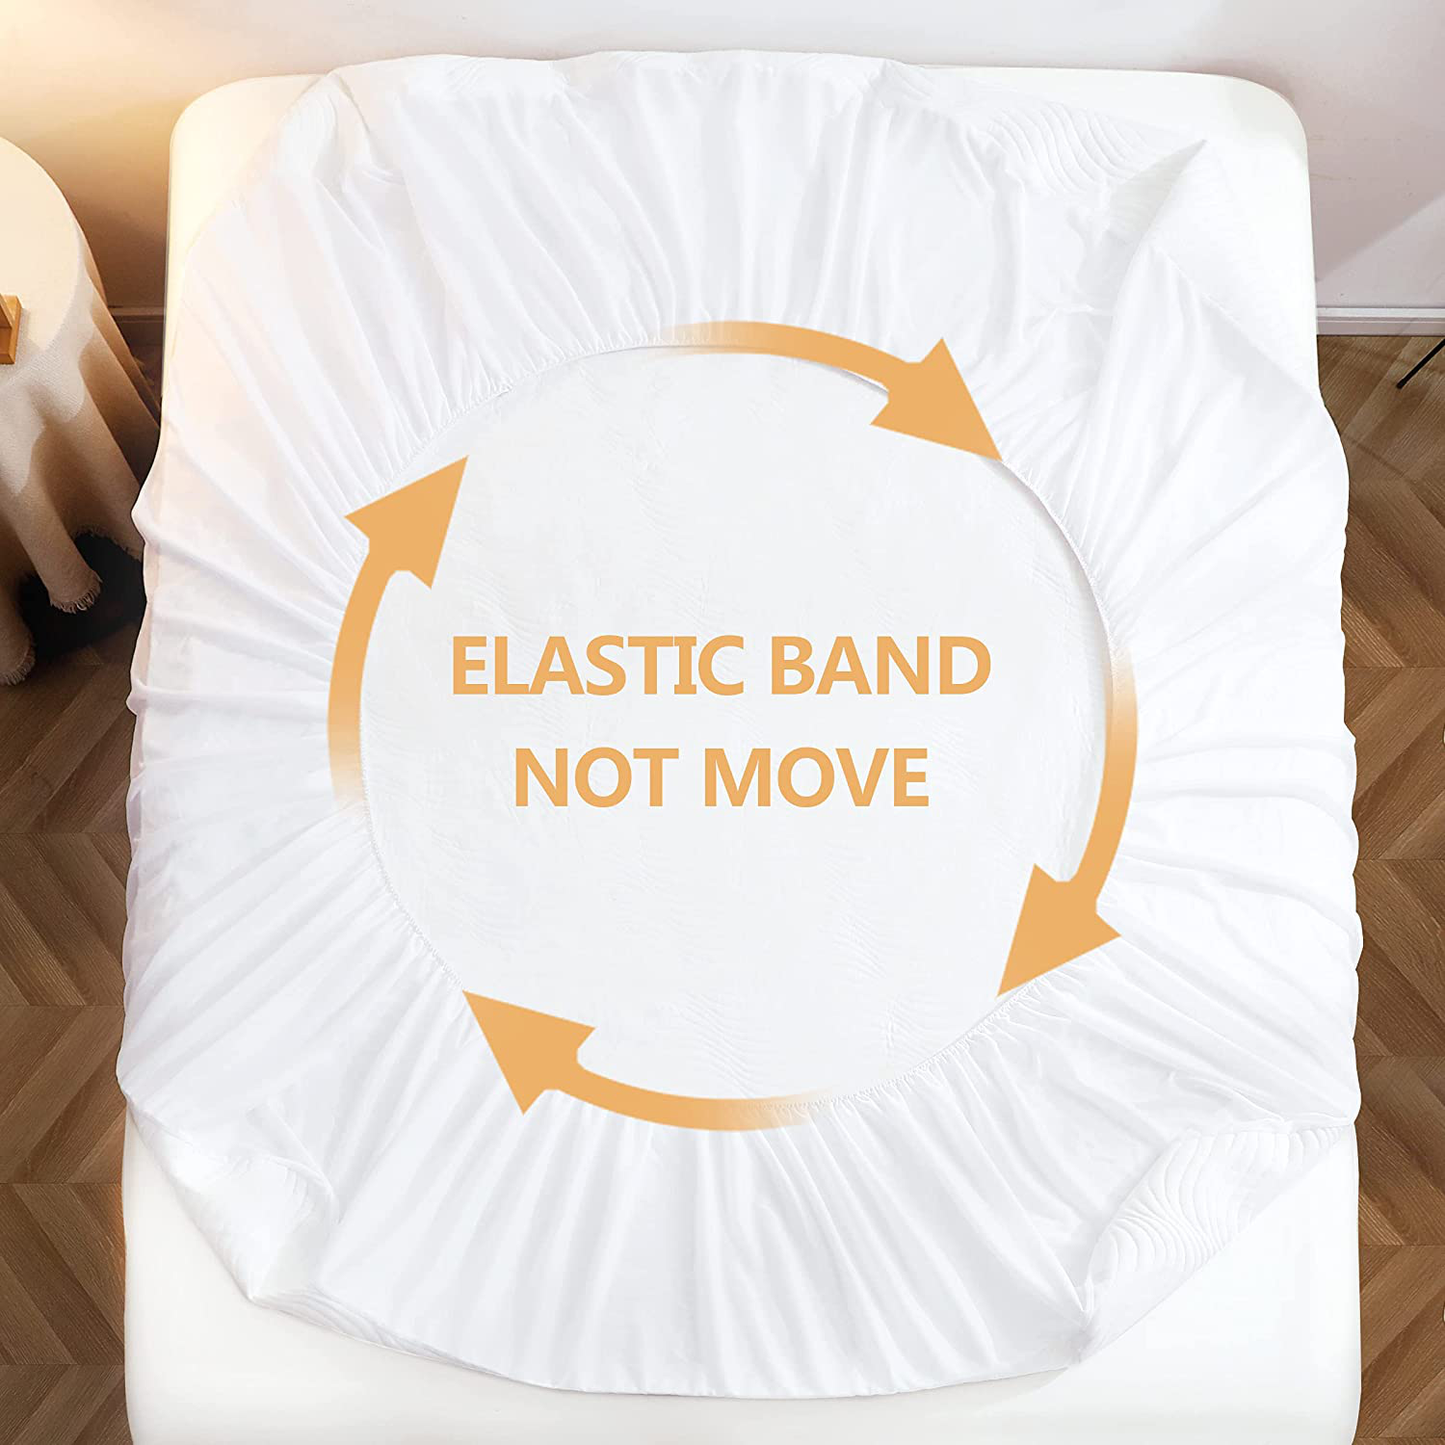 Jadeite star King Size Easy to Clean Mattress Pad Waterproof Mattress Protector, Deep Pocket Fitted 8-21 Inches Breathable Noiseless Soft Mattress Cover